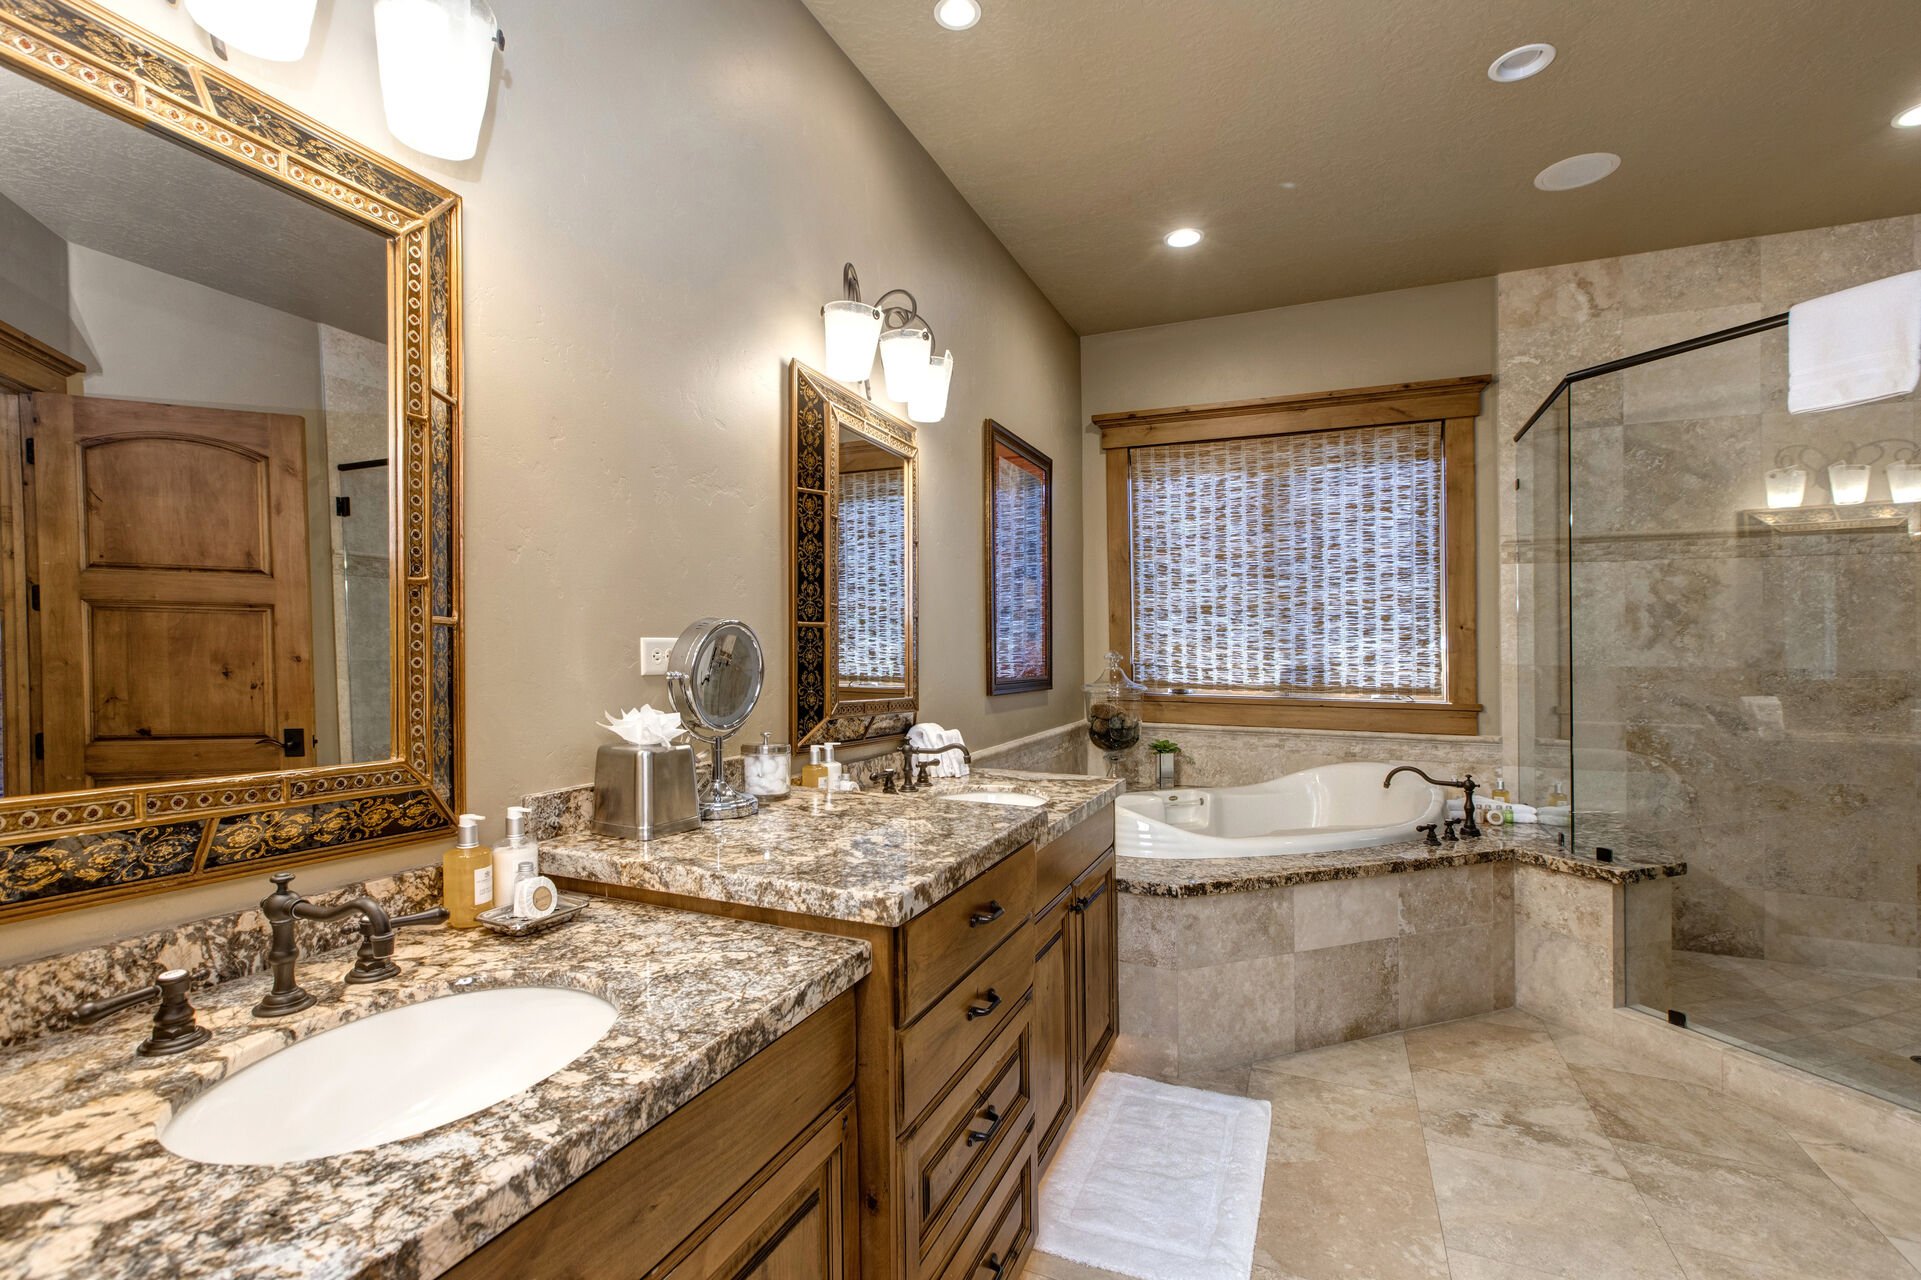 Master bath with jetted tub, large tiled shower, dual vanities, separate wash closet and walk-in closet